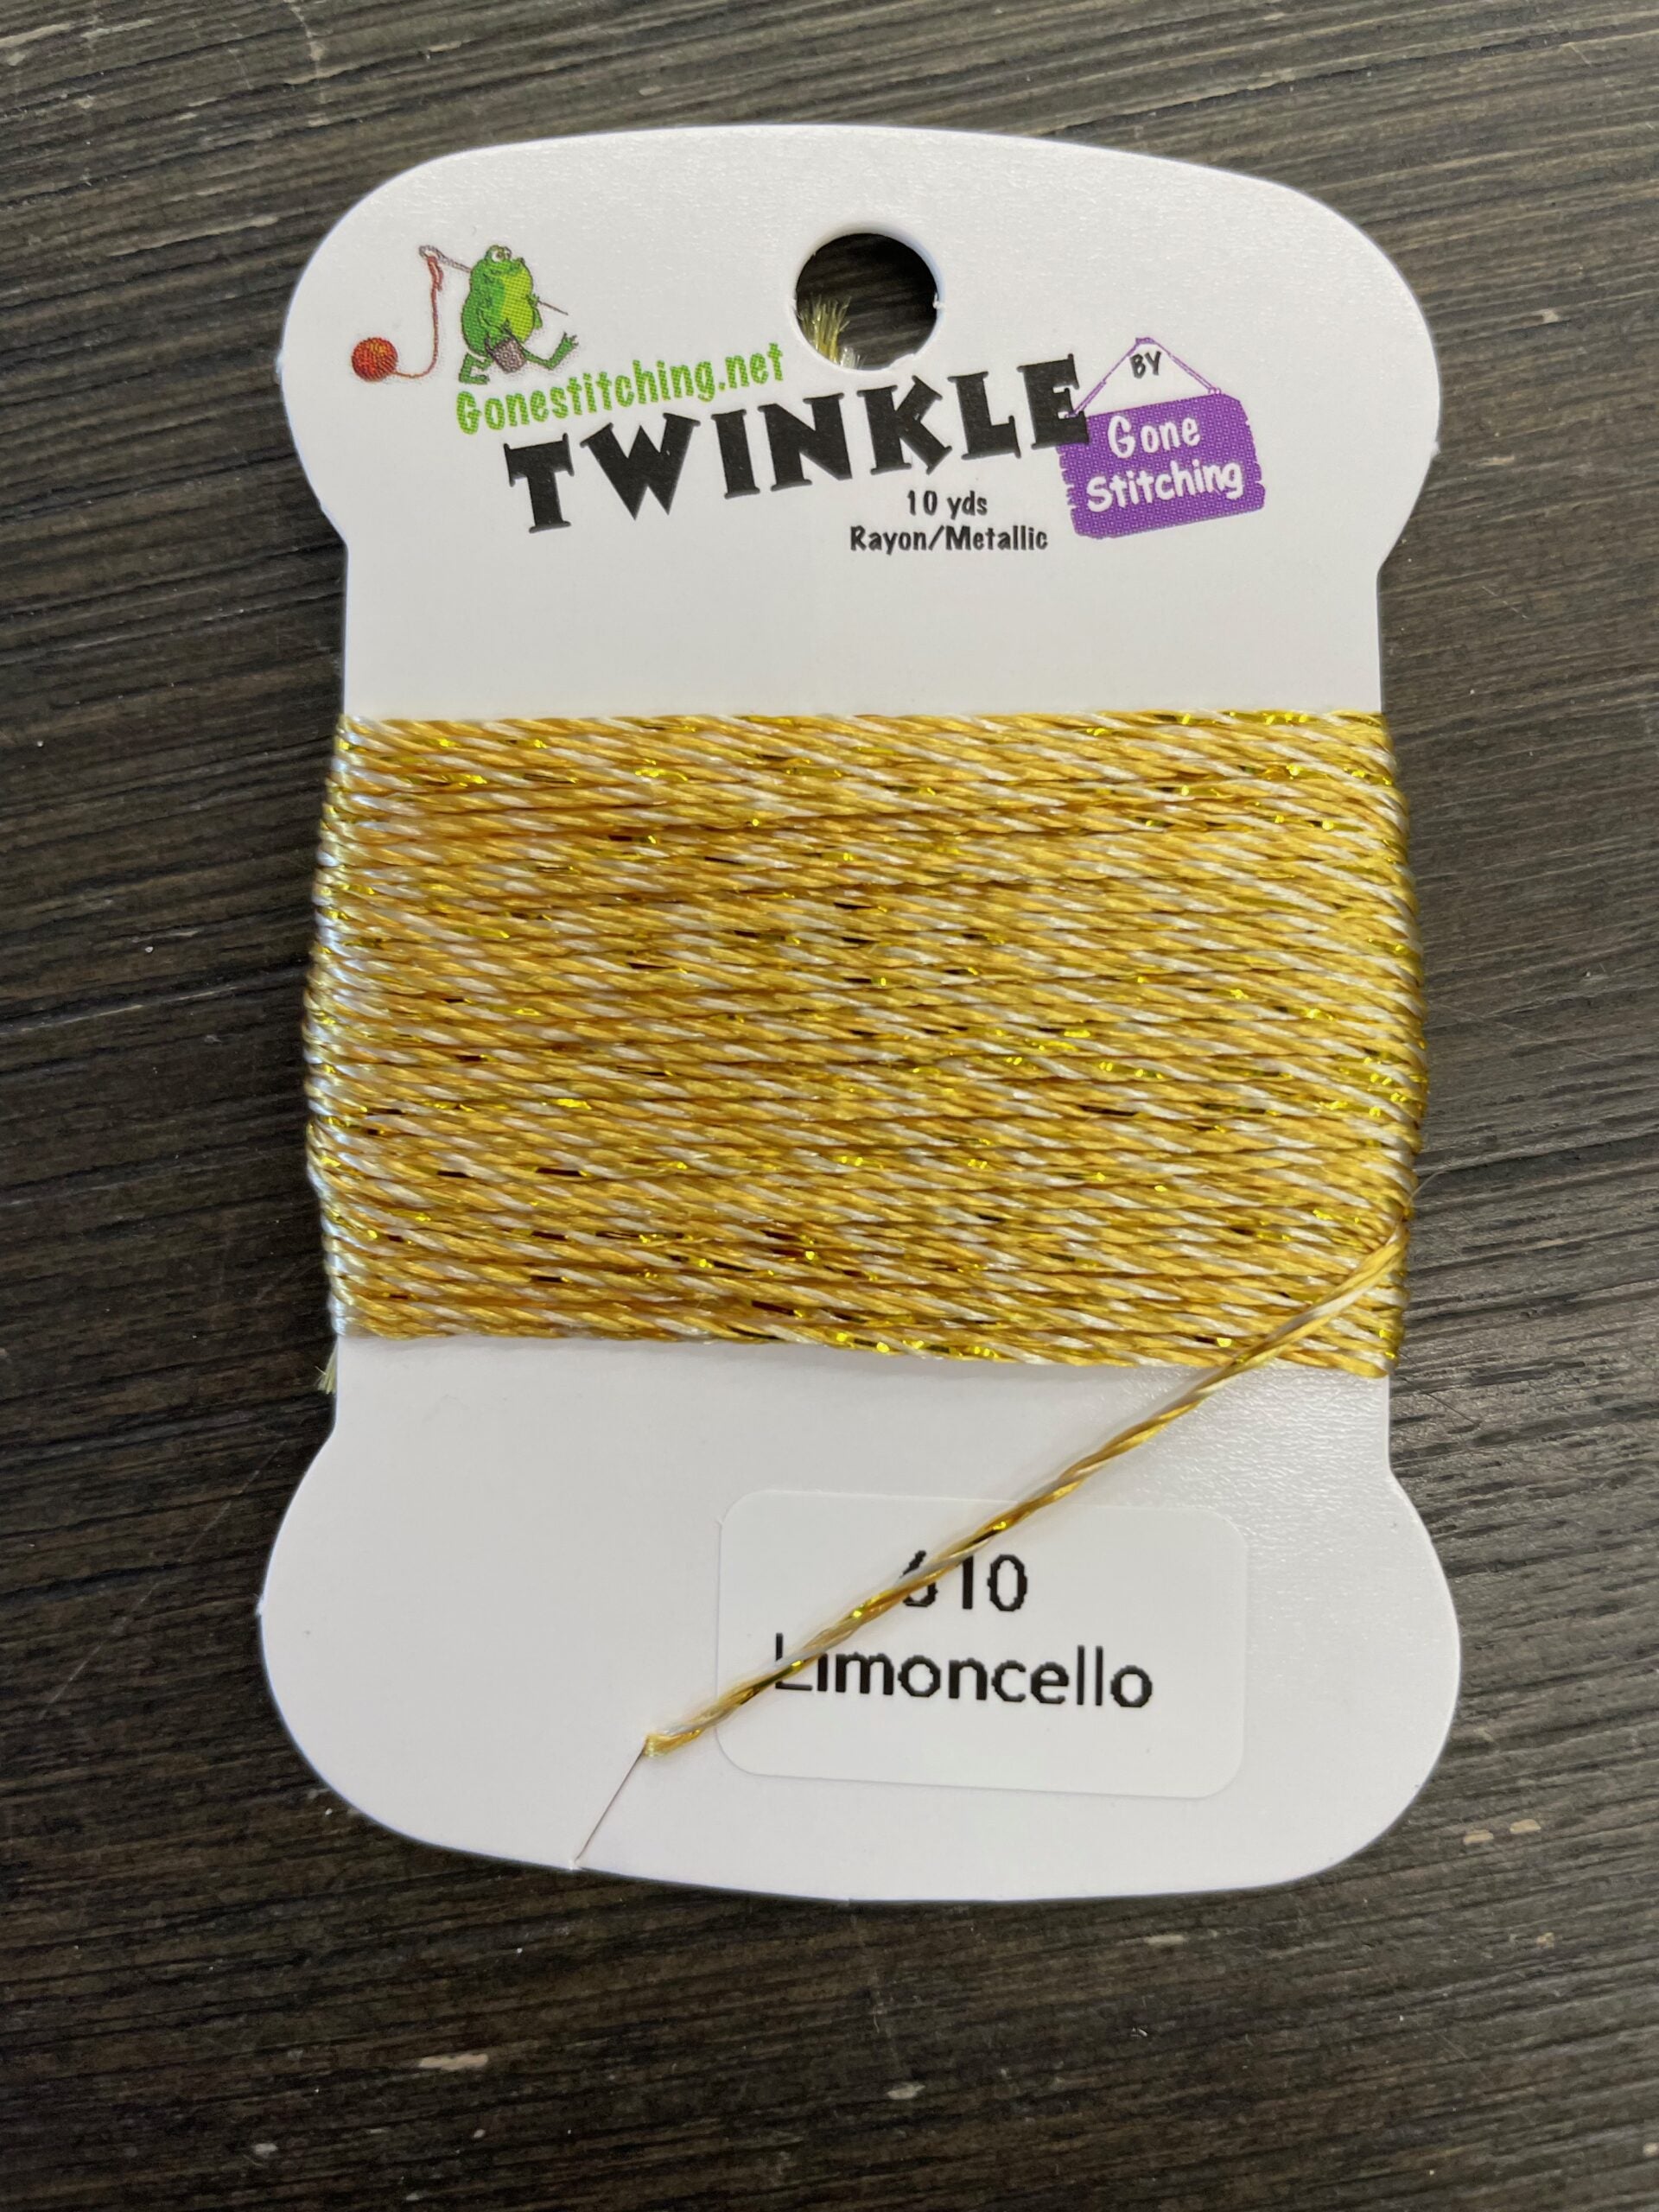 GS - Twinkle - 0610 - Limoncello